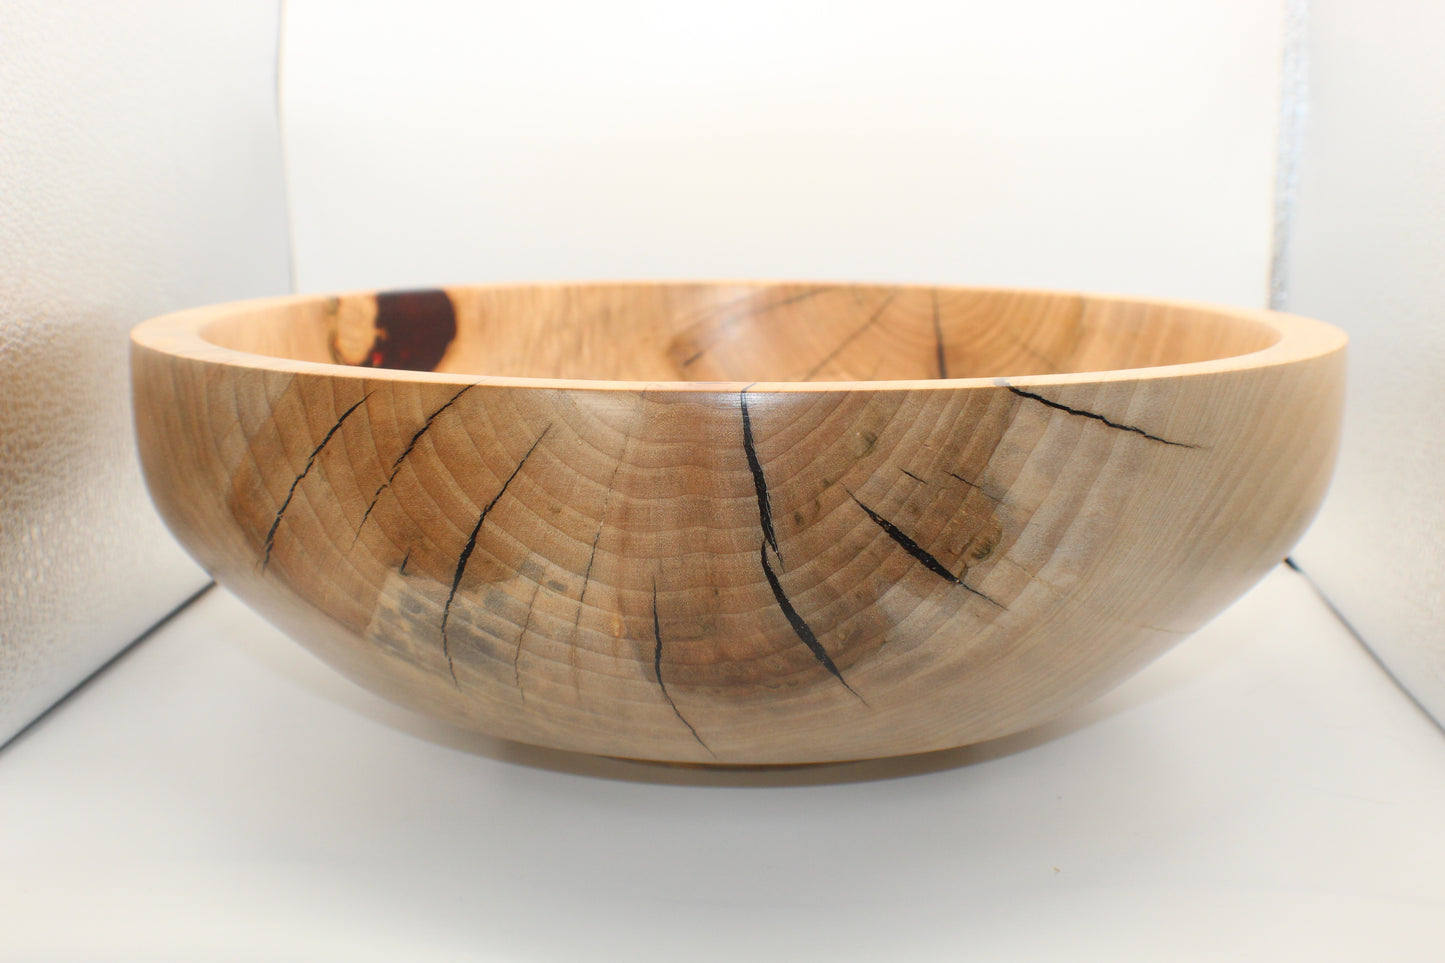 Spalted Maple Fruit Bowl